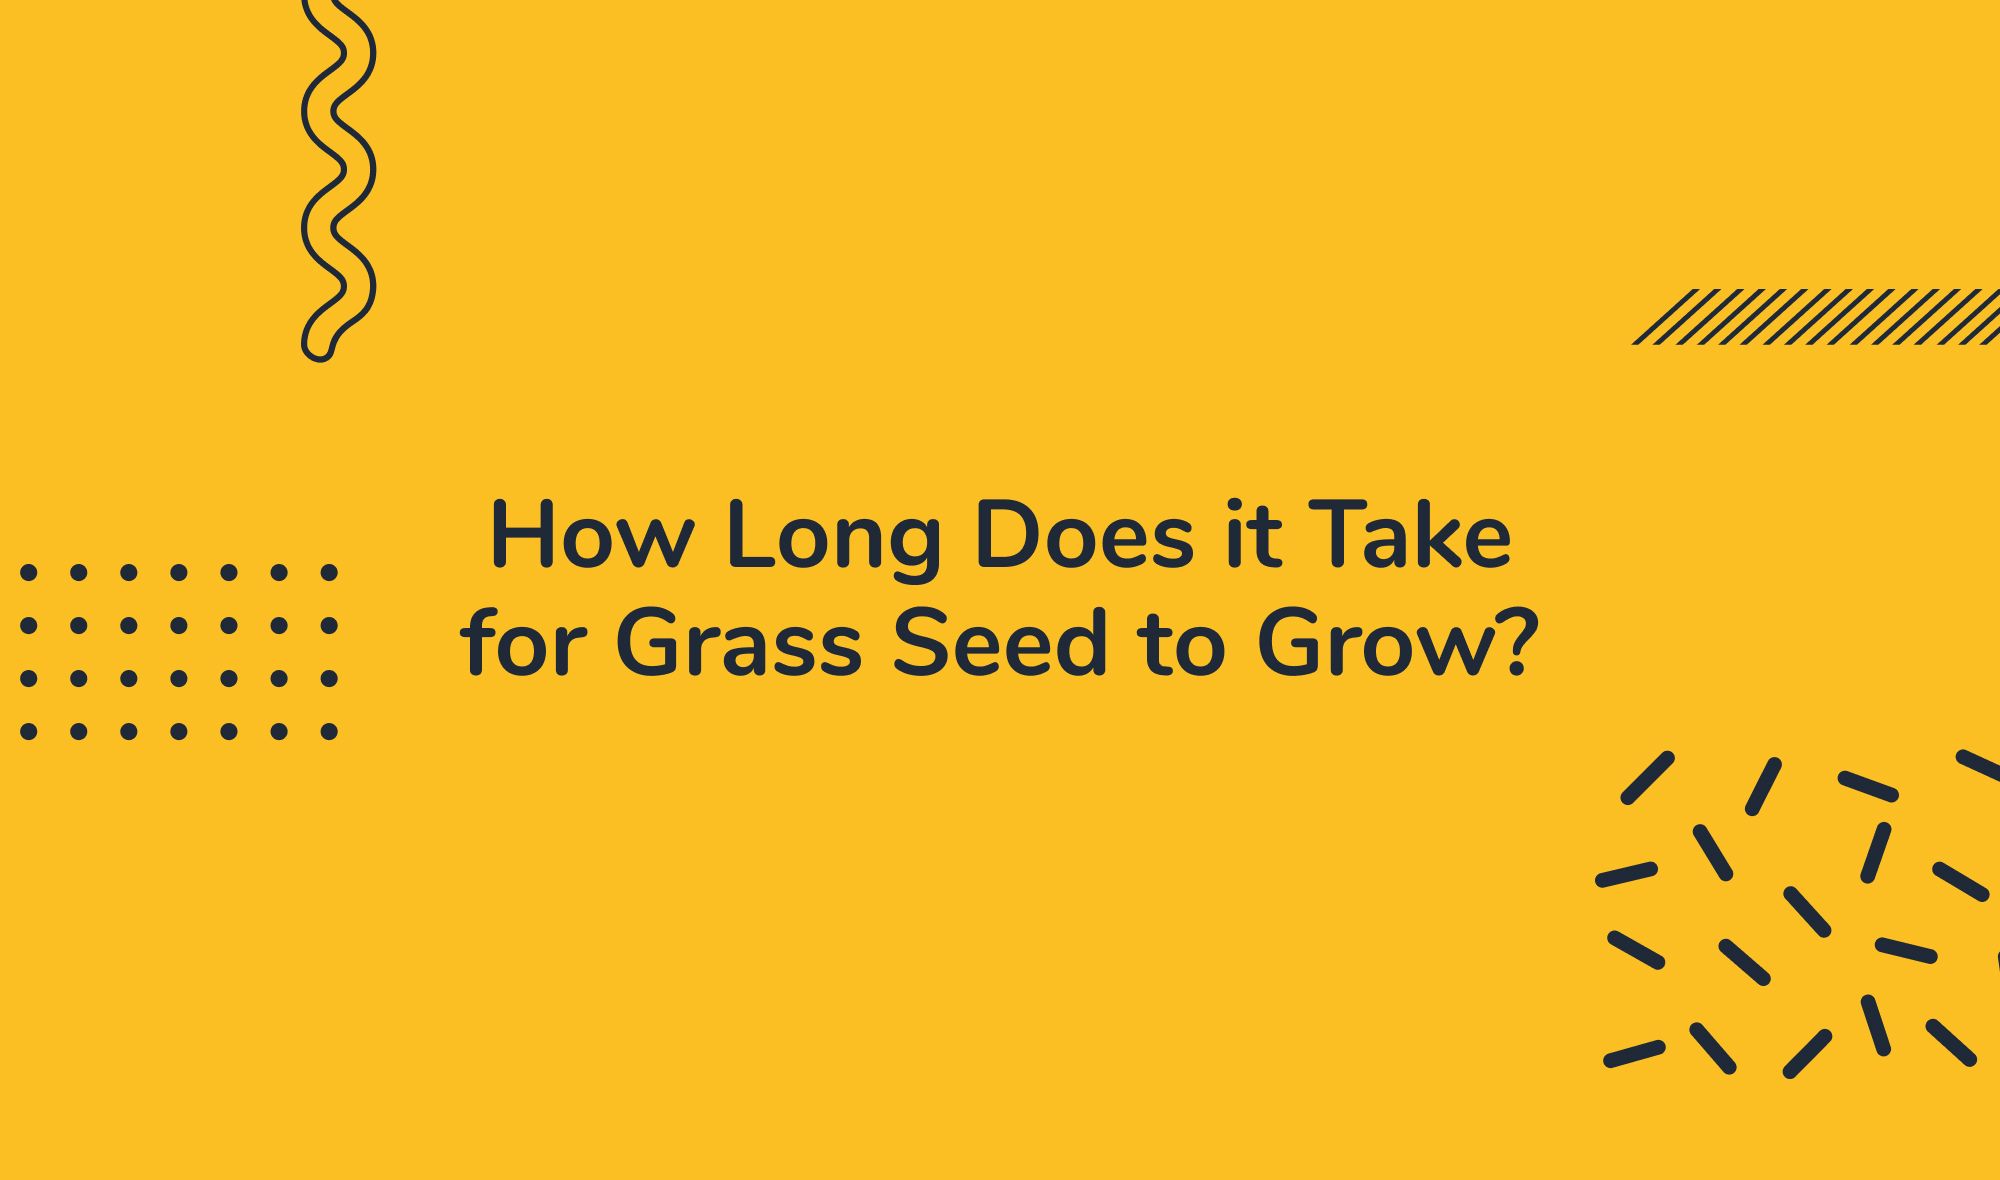 How Long Does it Take for Grass Seed to Grow?